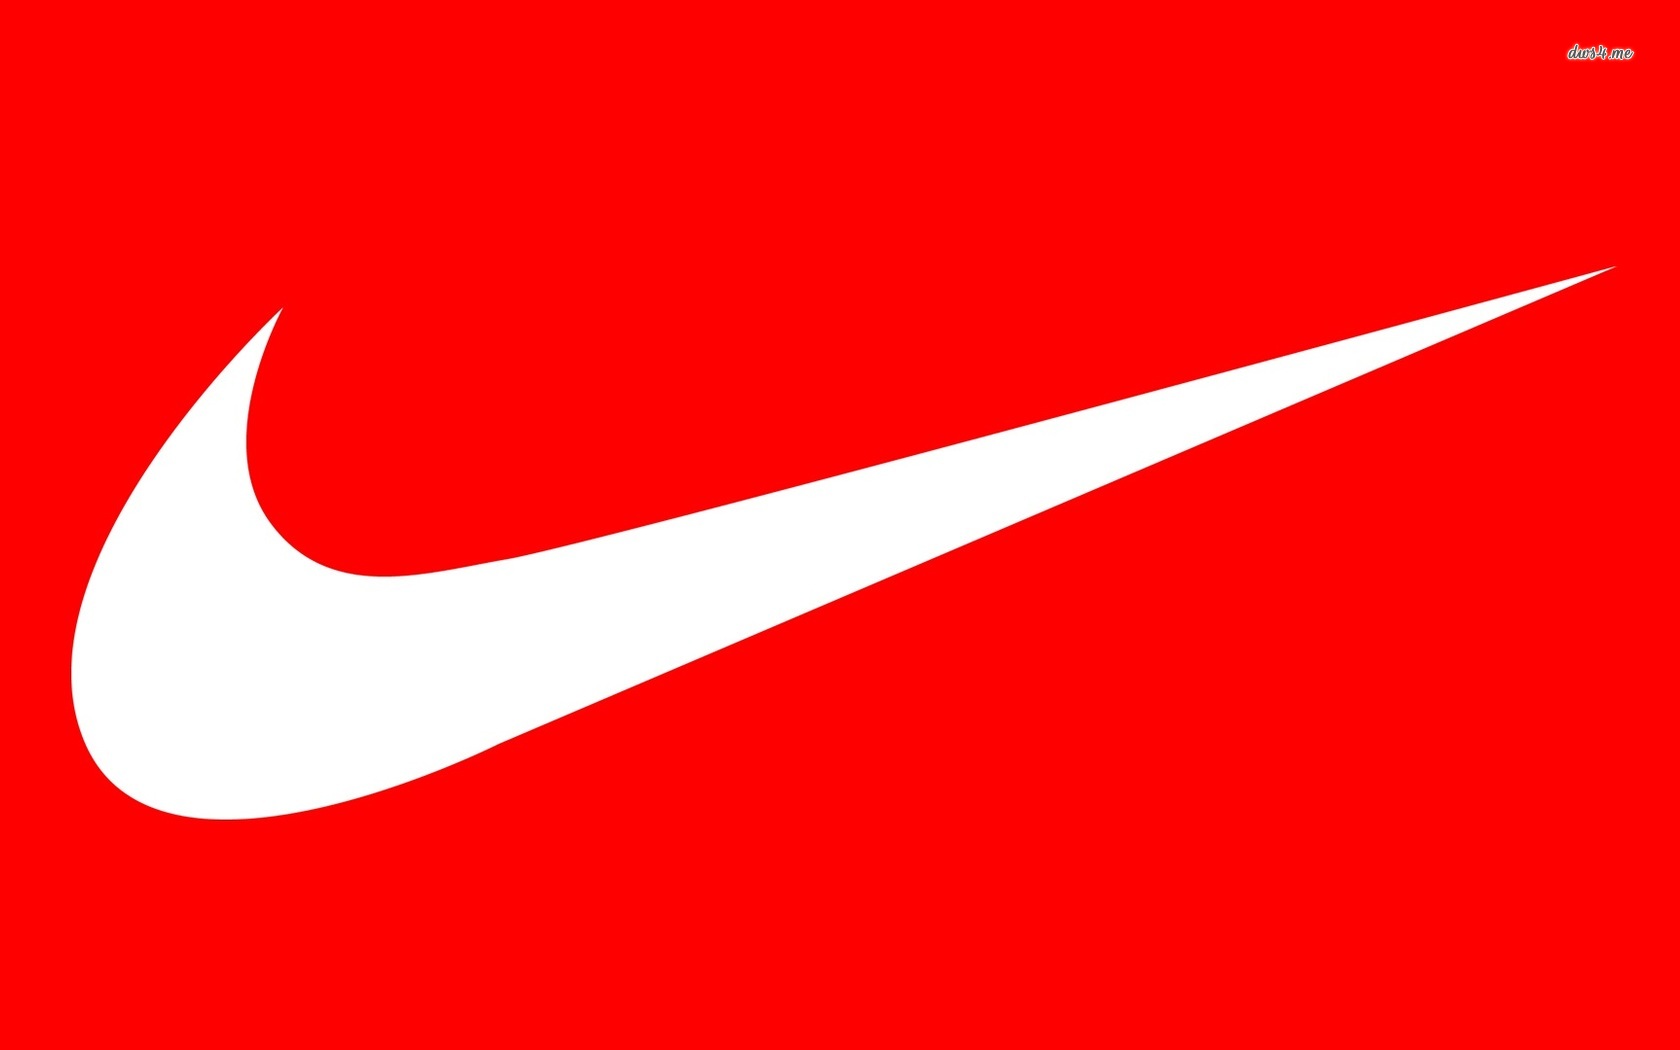 Nike Logo Red And White - HD Wallpaper 